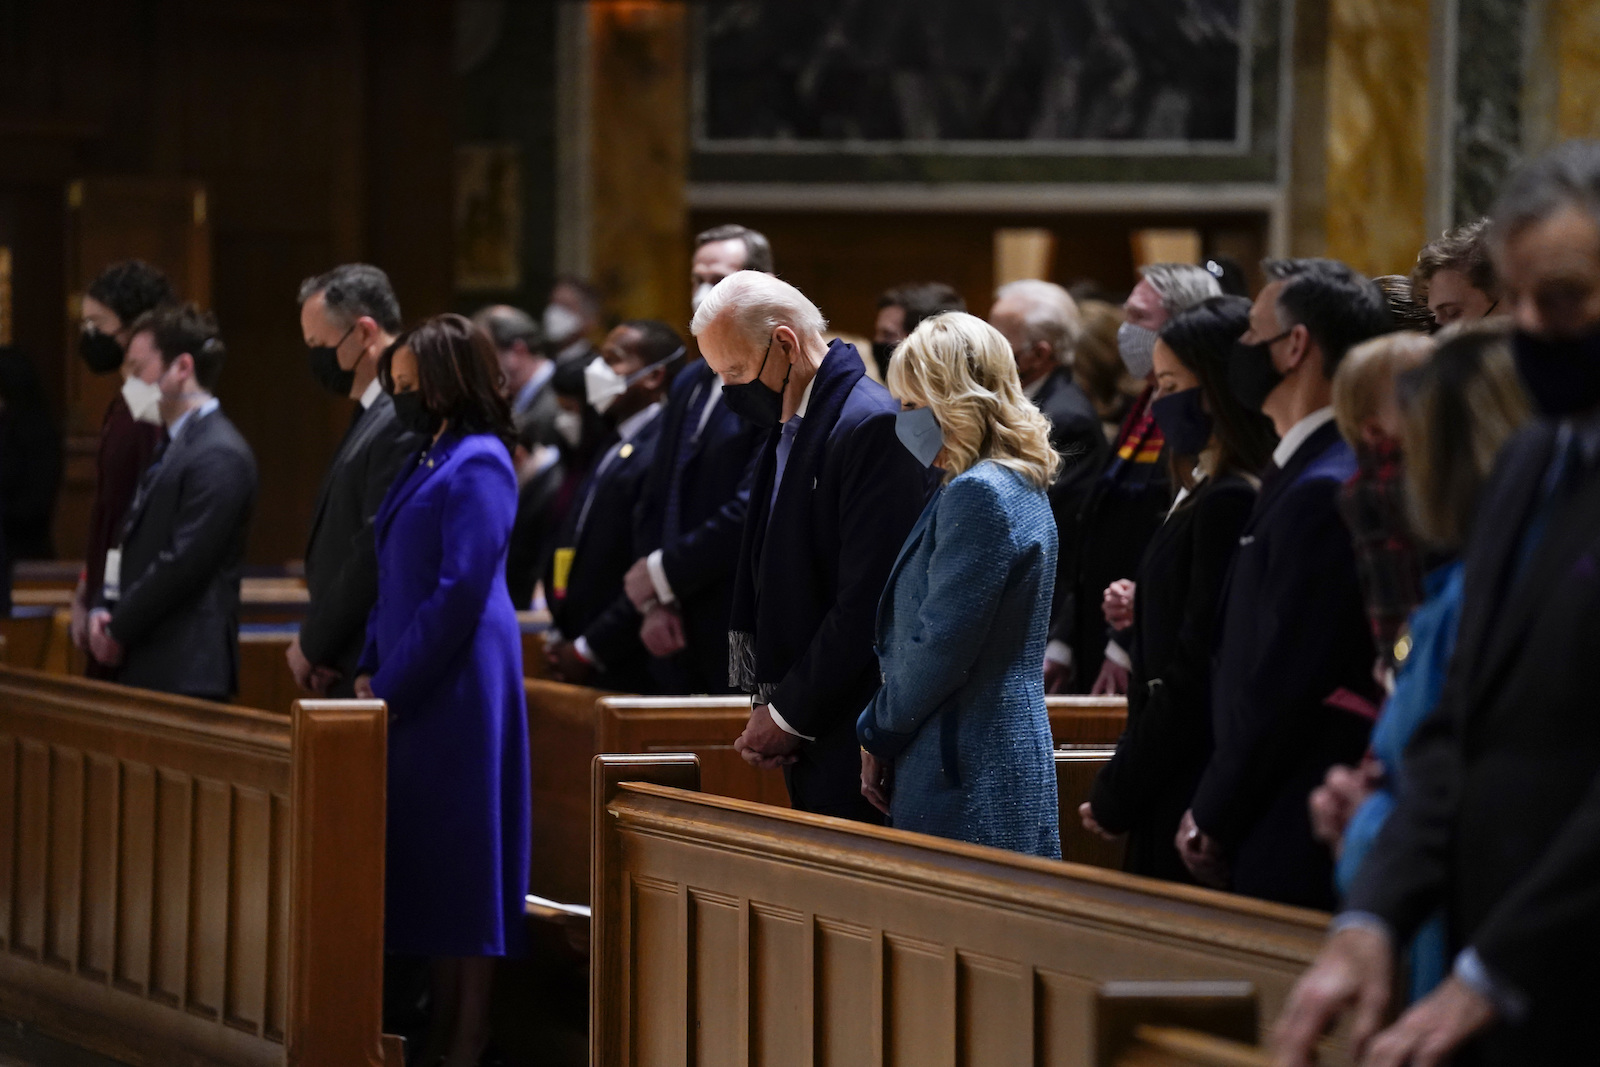 President-elect Joe Biden and his wife, Jill Biden, attend Mass at the Cathedral of St. Matthew the Apostle during Inauguration Day ceremonies Jan. 20, 2021, in Washington. (AP Photo/Evan Vucci)